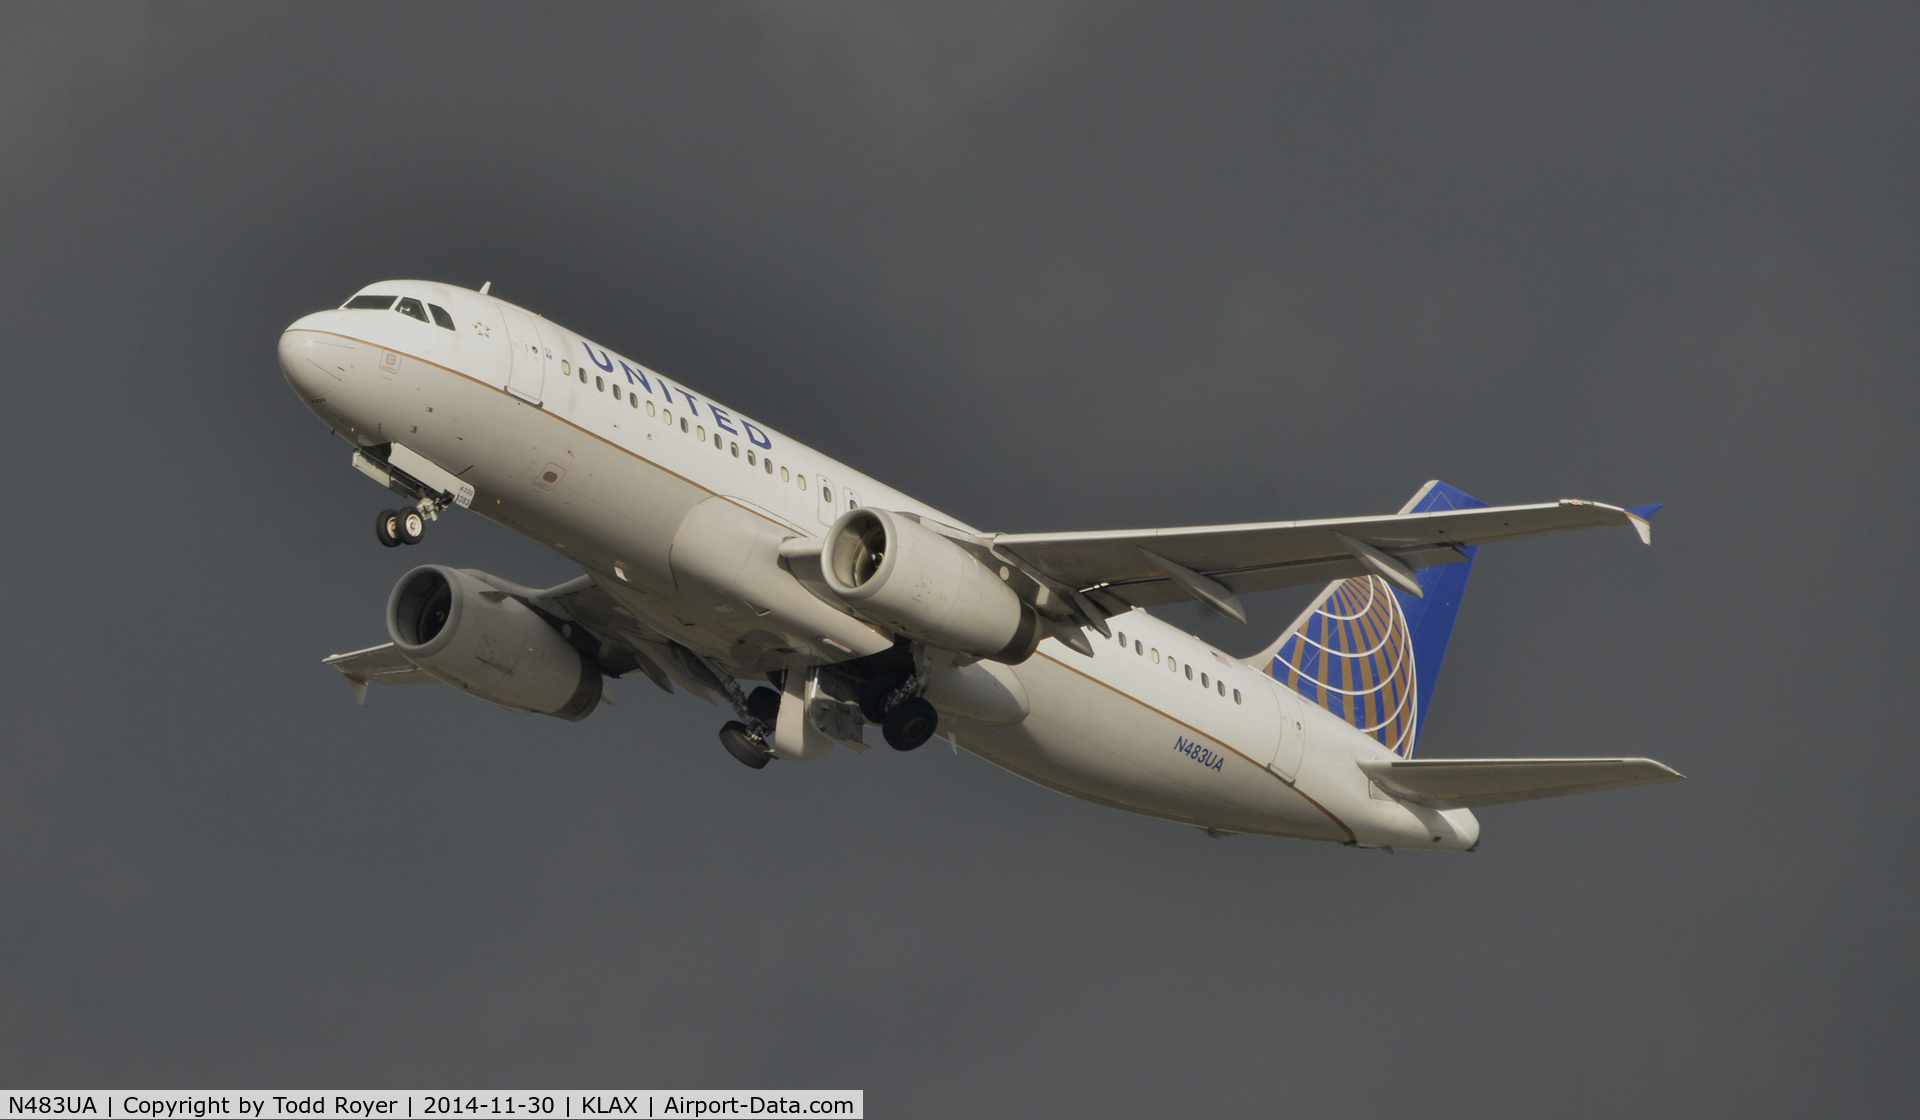 N483UA, 2001 Airbus A320-232 C/N 1586, Departing LAX on a stormy day